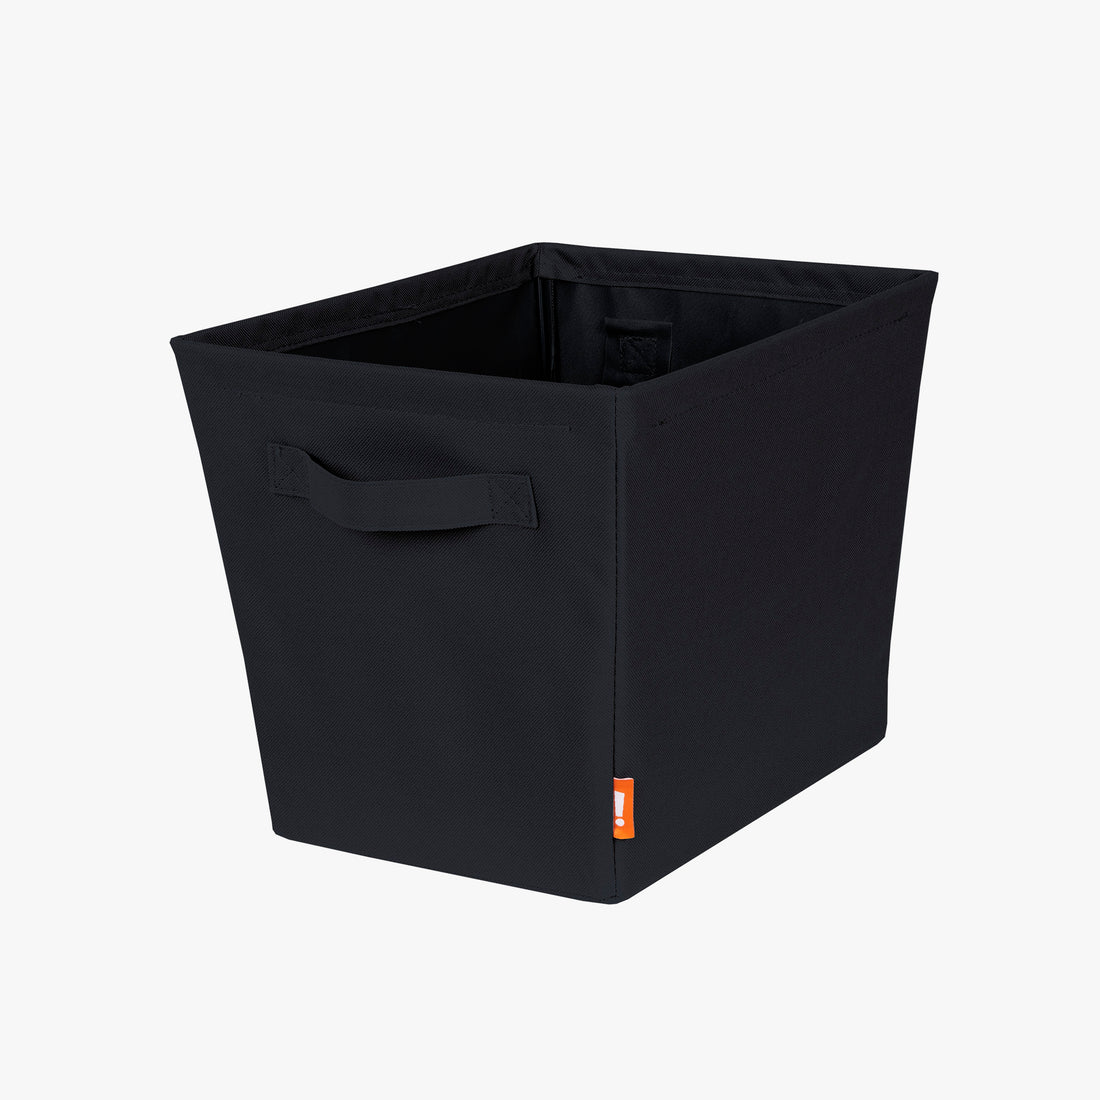 Set of 6 | Small Storage Bin with Sewn on Handles